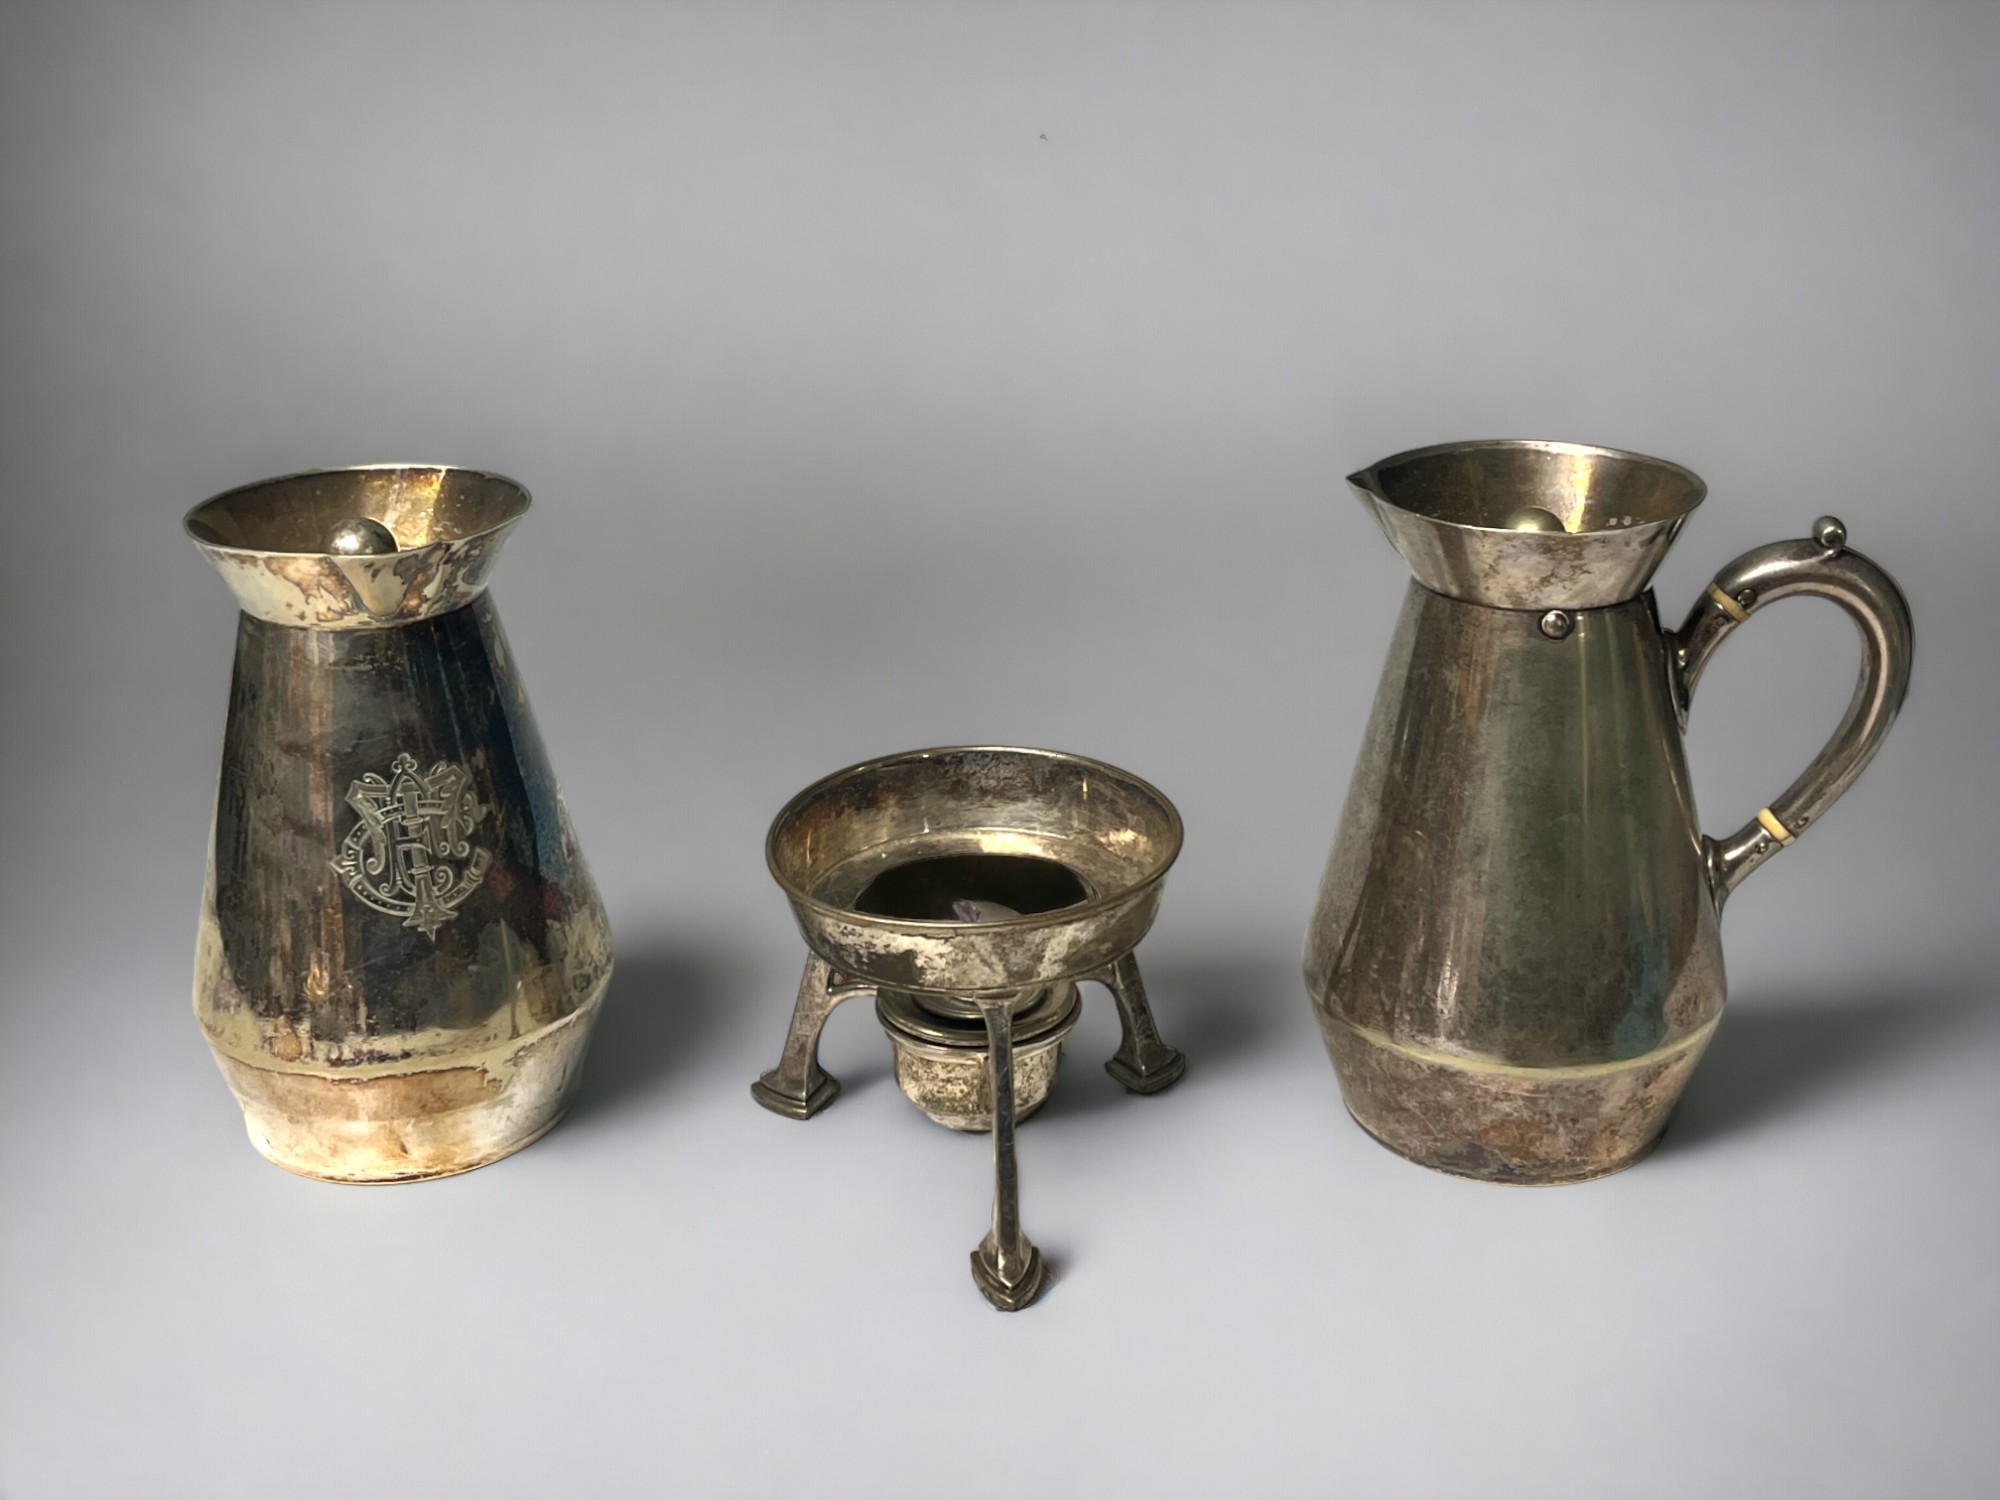 TWO 19th CENTURY SILVER PLATE HOT WATER PITCHERS. By Richard Hodd & son. One with warmer. Weight, - Image 3 of 4